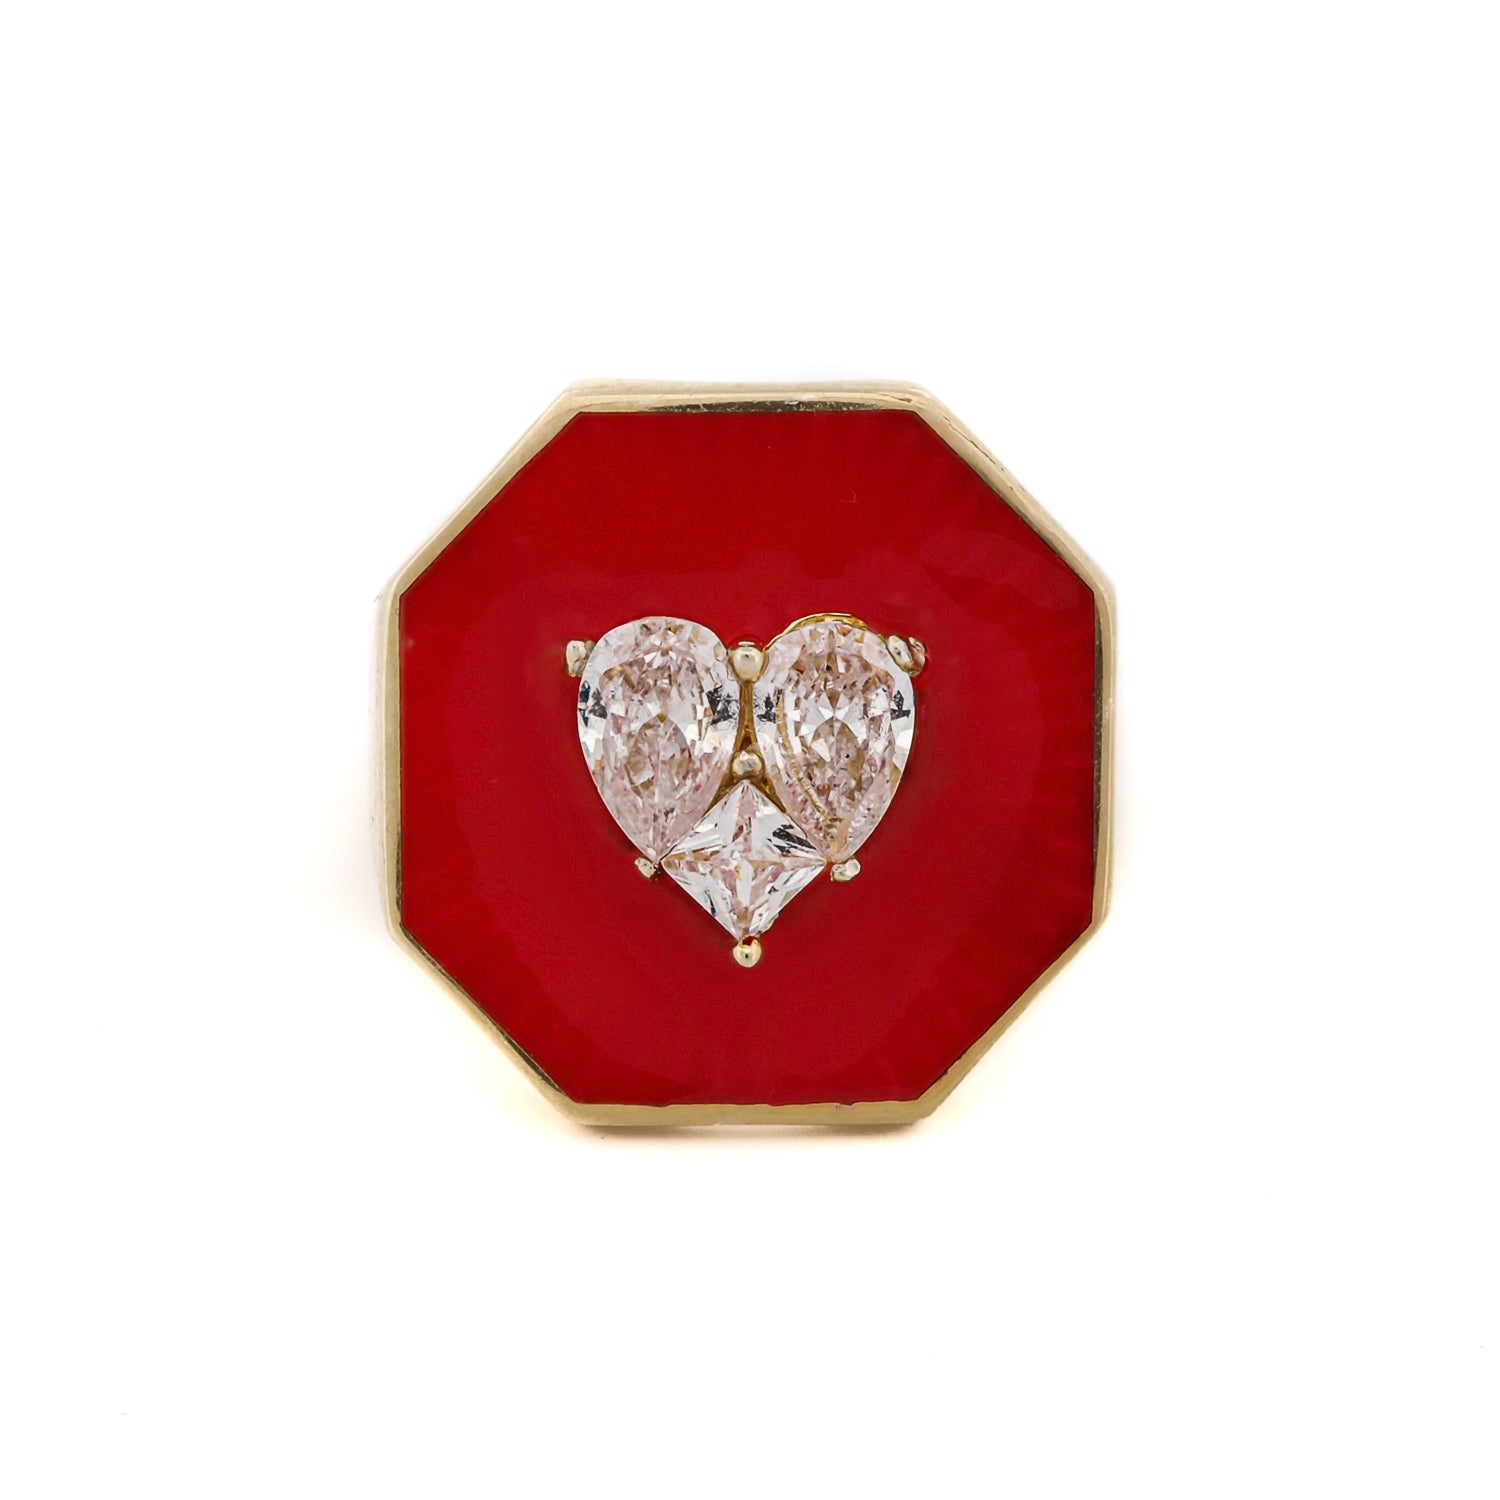 Captivating Beauty: Red Enamel Heart Gold Ring with Diamond